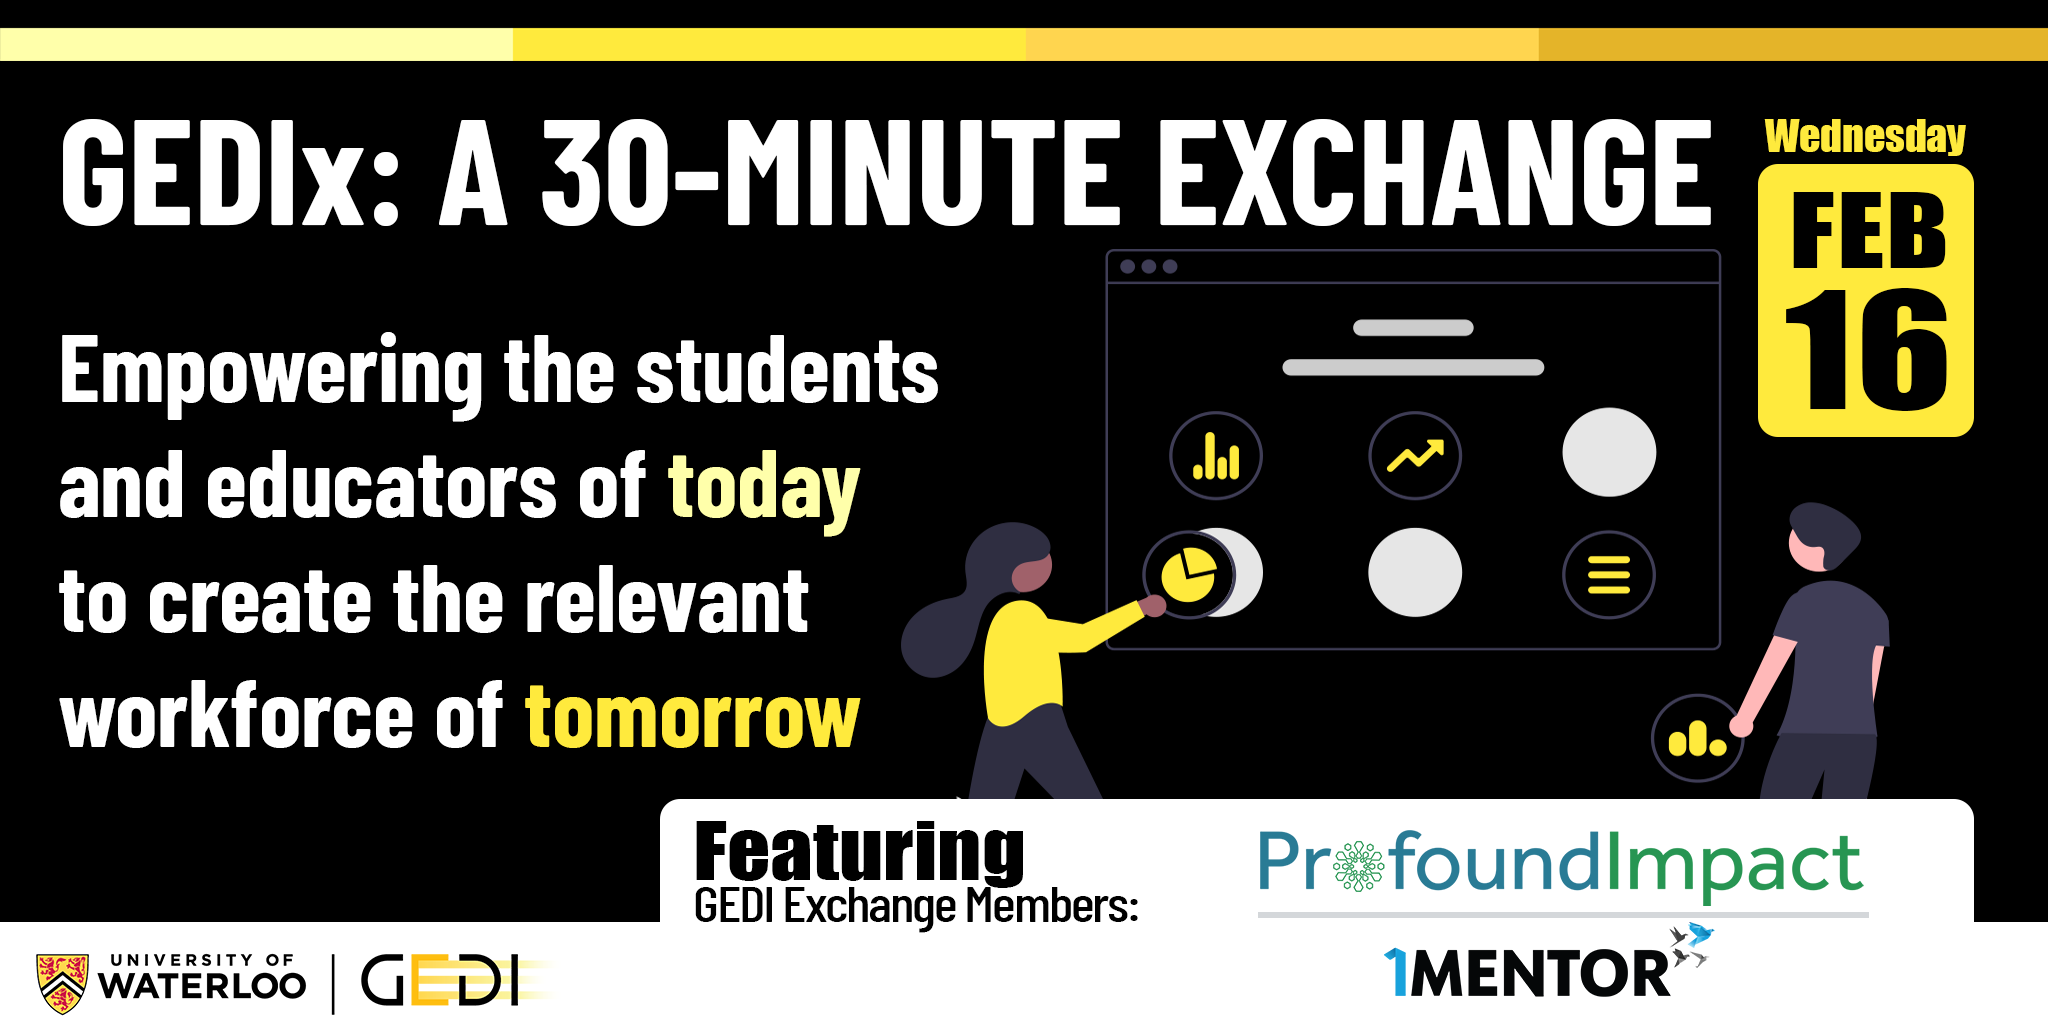 Promotional banner for GEDIx: A 30-minute exchange with Profound Impact and 1Mentor